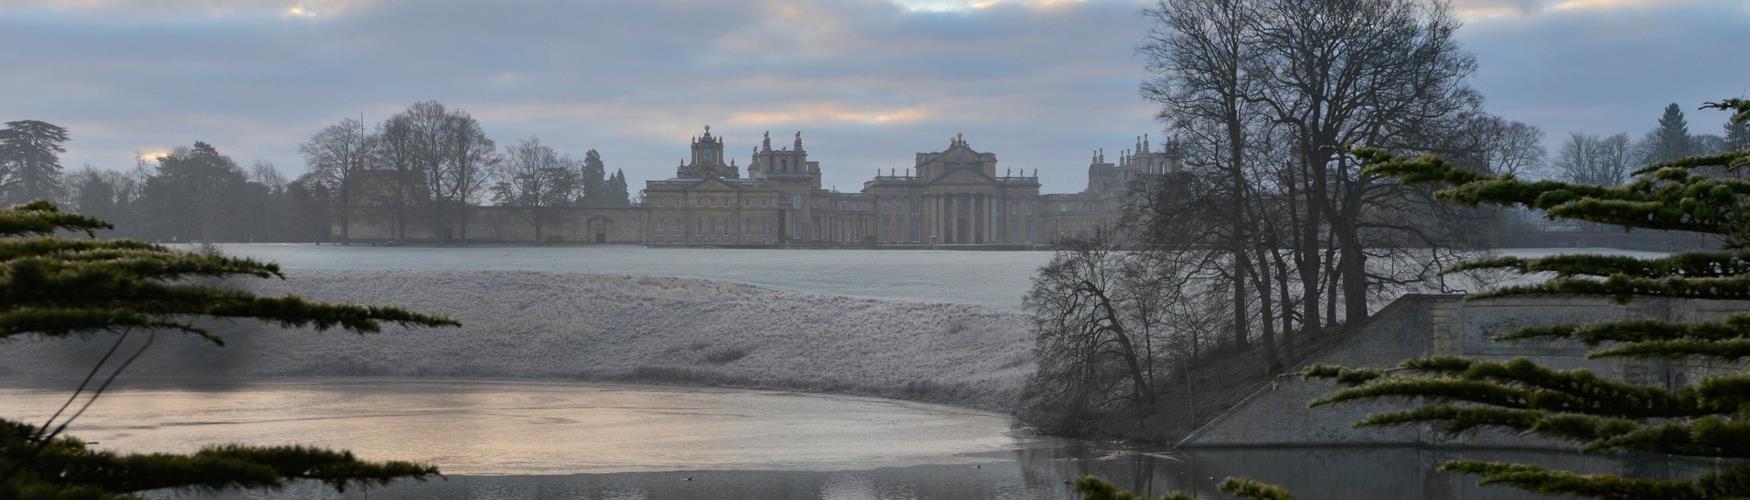 The grounds of Blenheim Palace in the frost